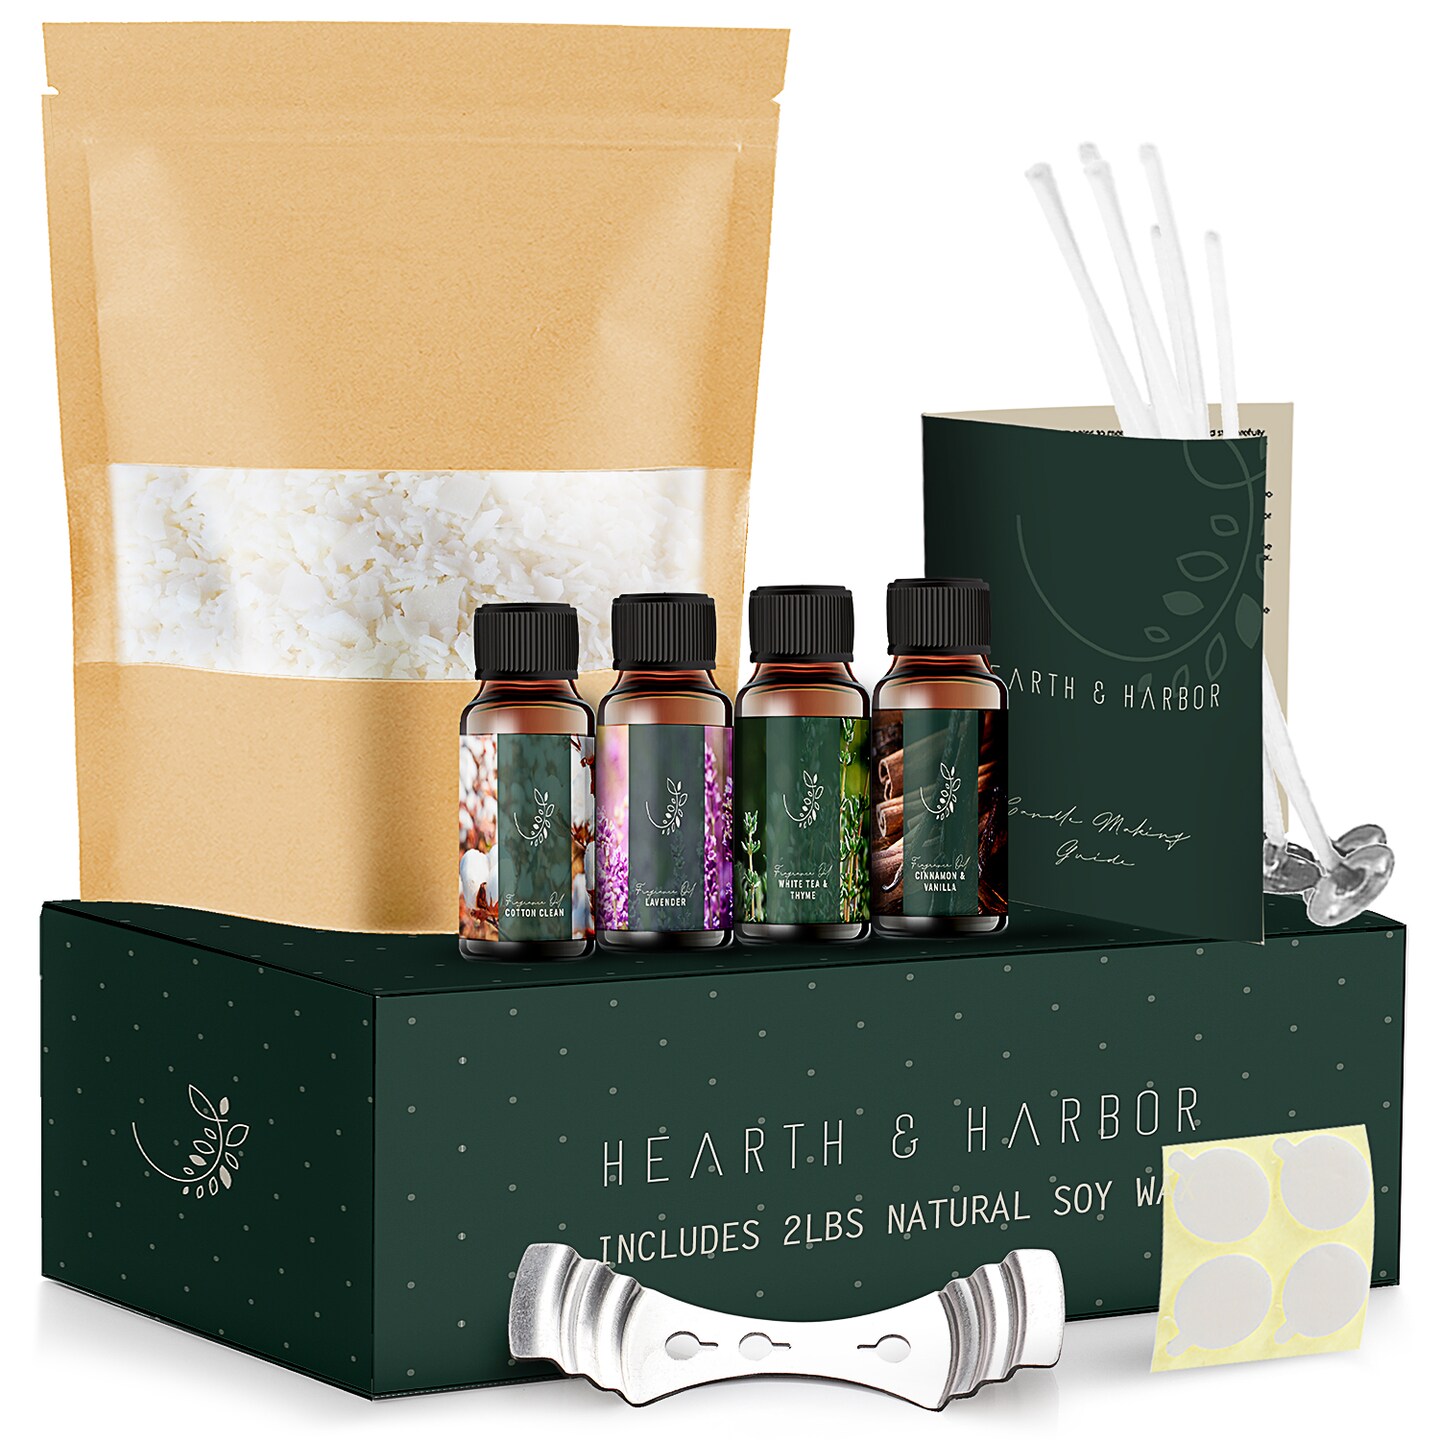 Hearth & Harbor Soy Candle Making Kit - Candle Wax for Candle